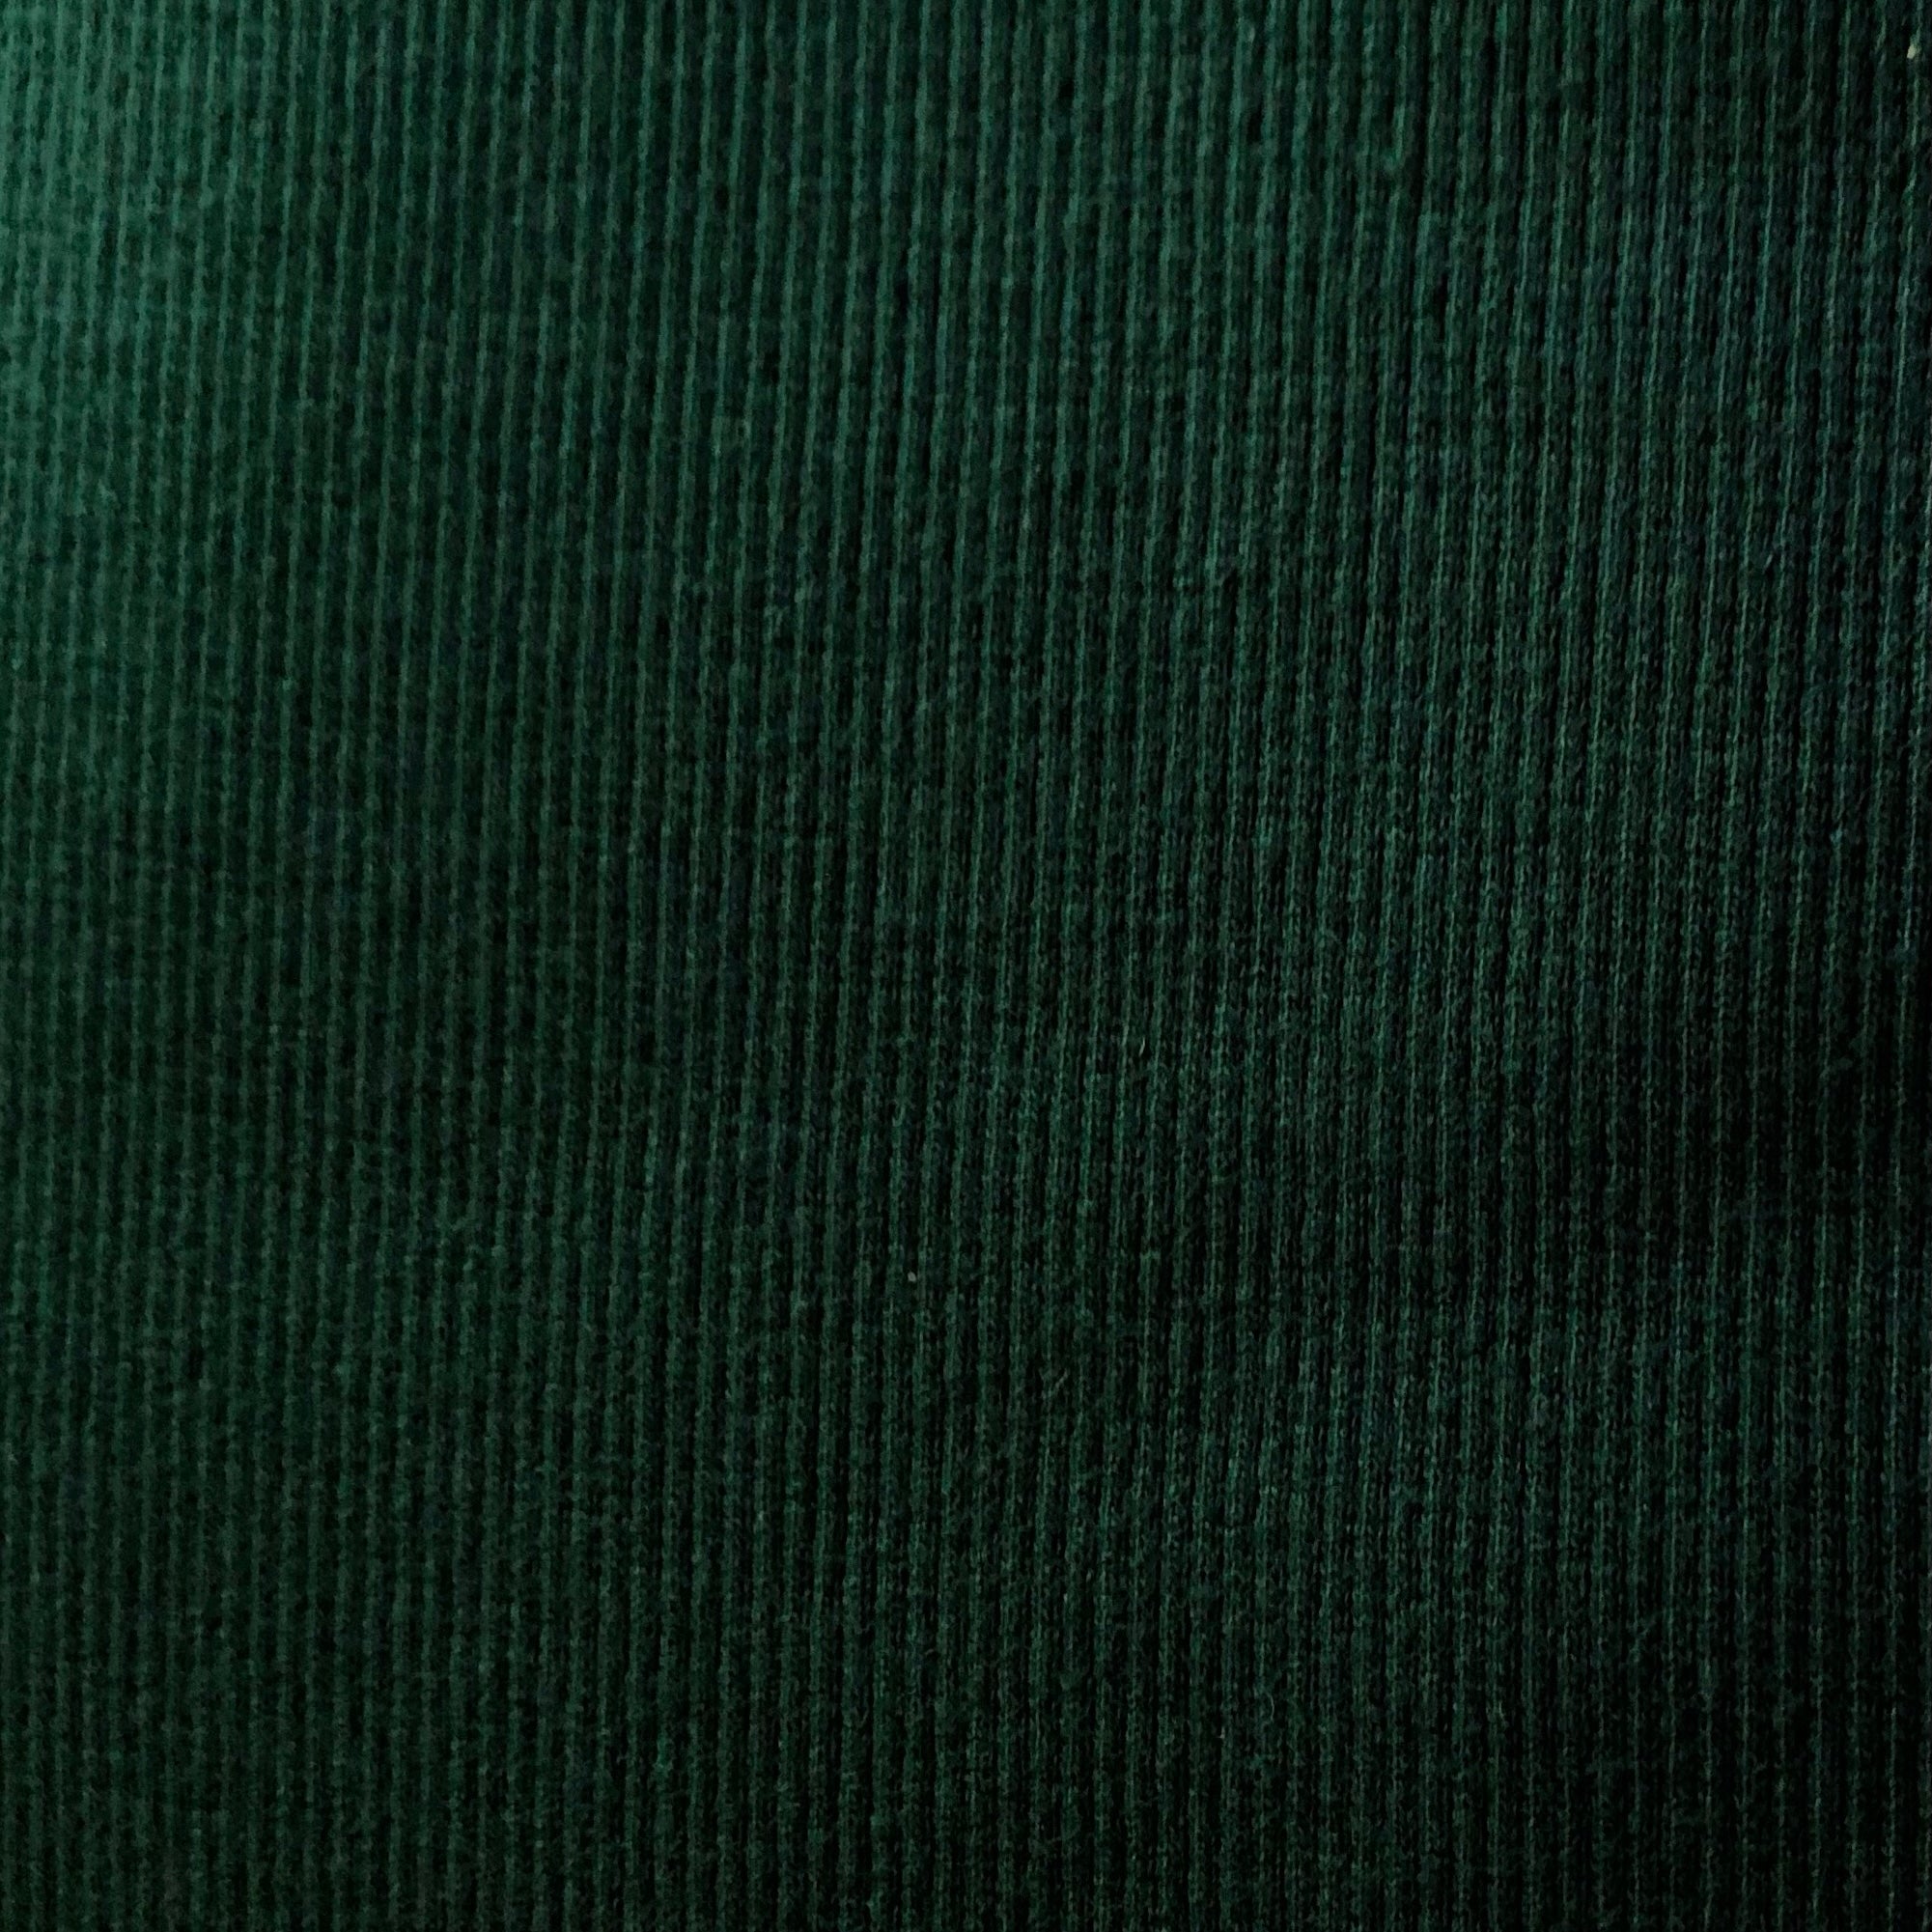 The Dark Green Lapel Ribbed Textured Knit Top